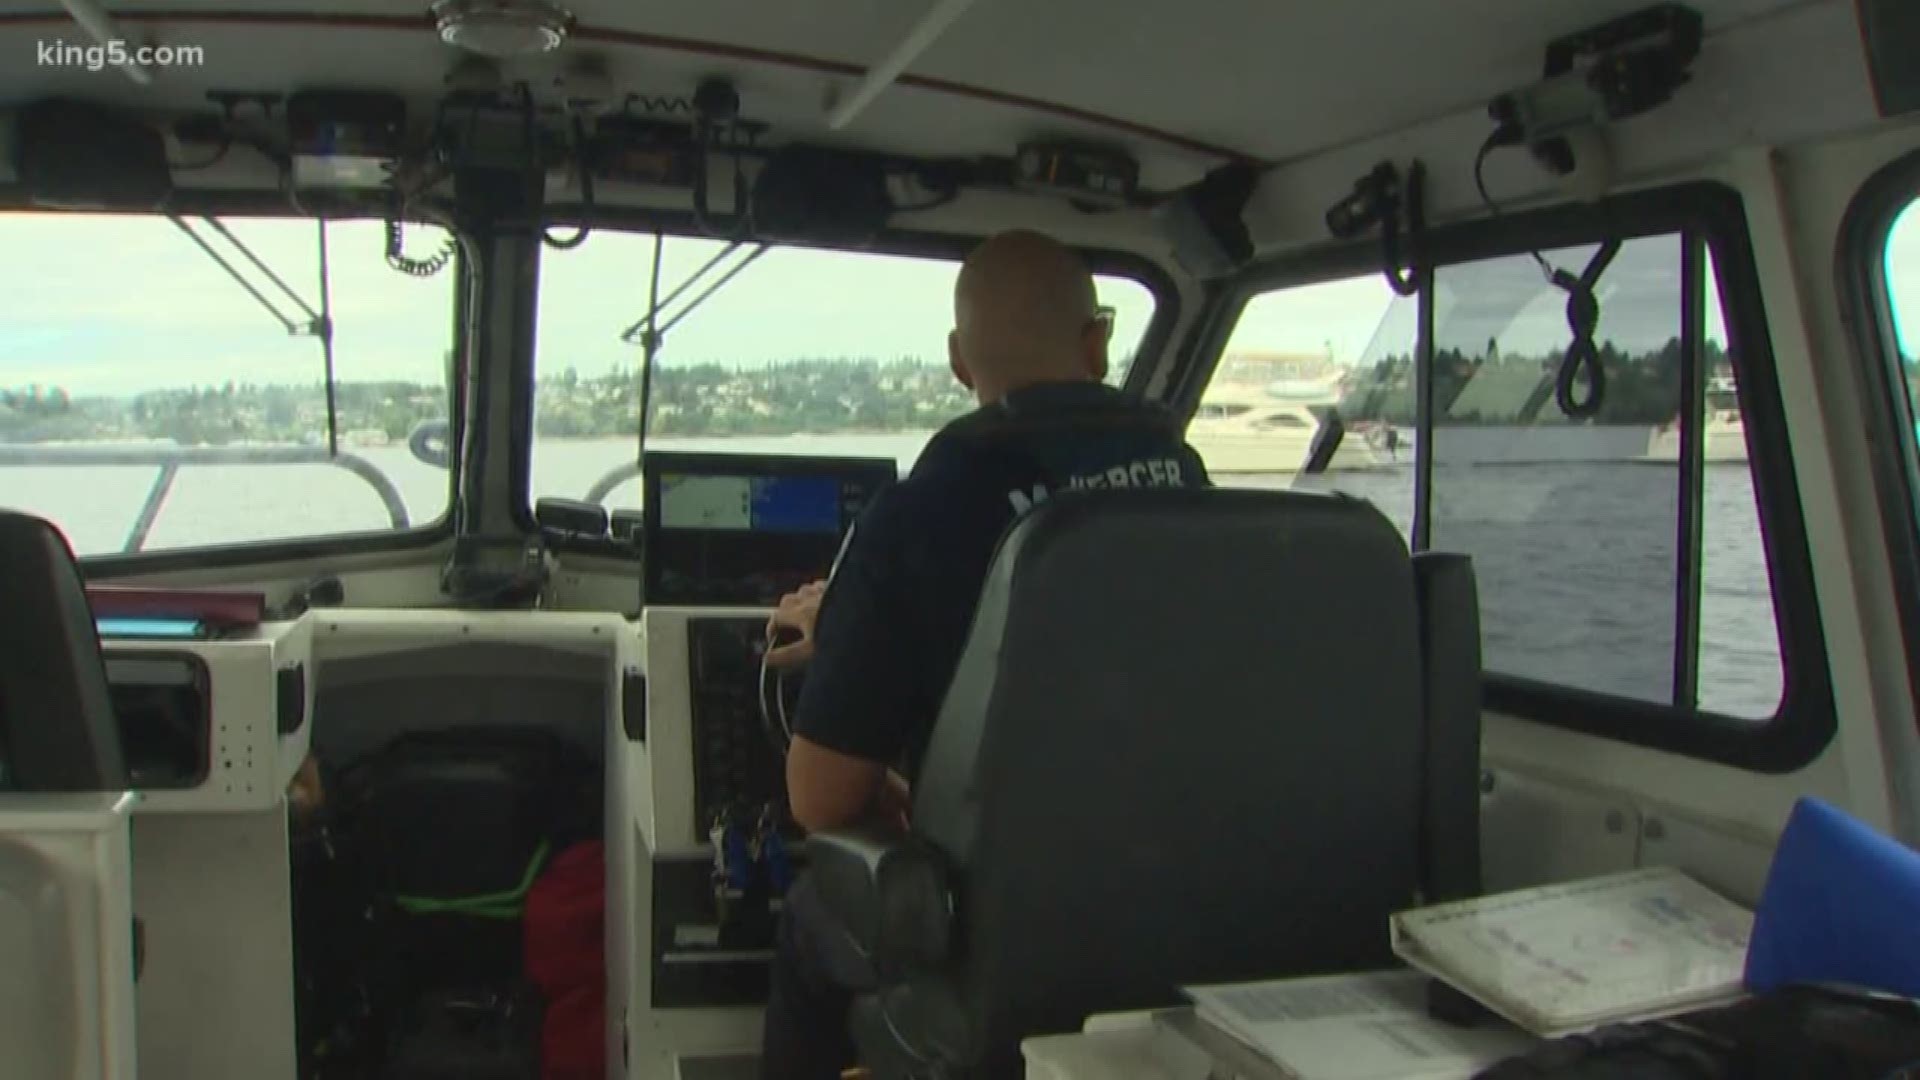 Marine patrols will be looking for boaters who are operating their watercraft while under the influence as well as ensuring paddleboarders and boaters have life jackets.